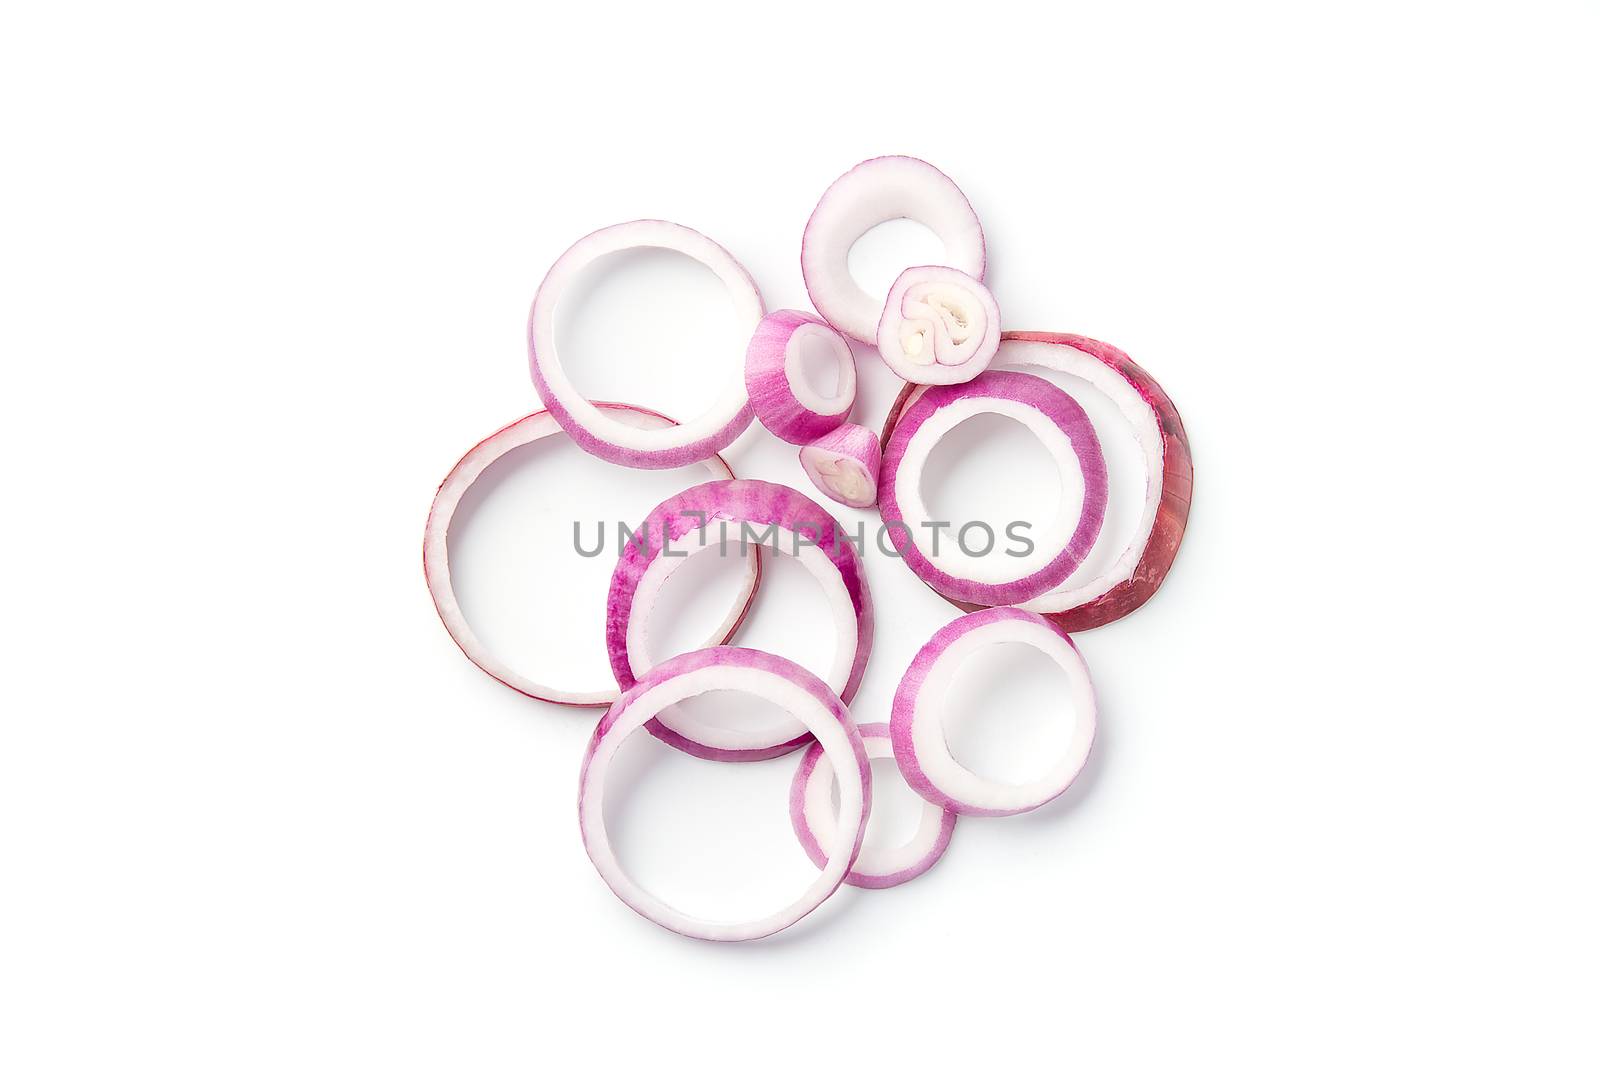 Sliced red onion rings on white background.